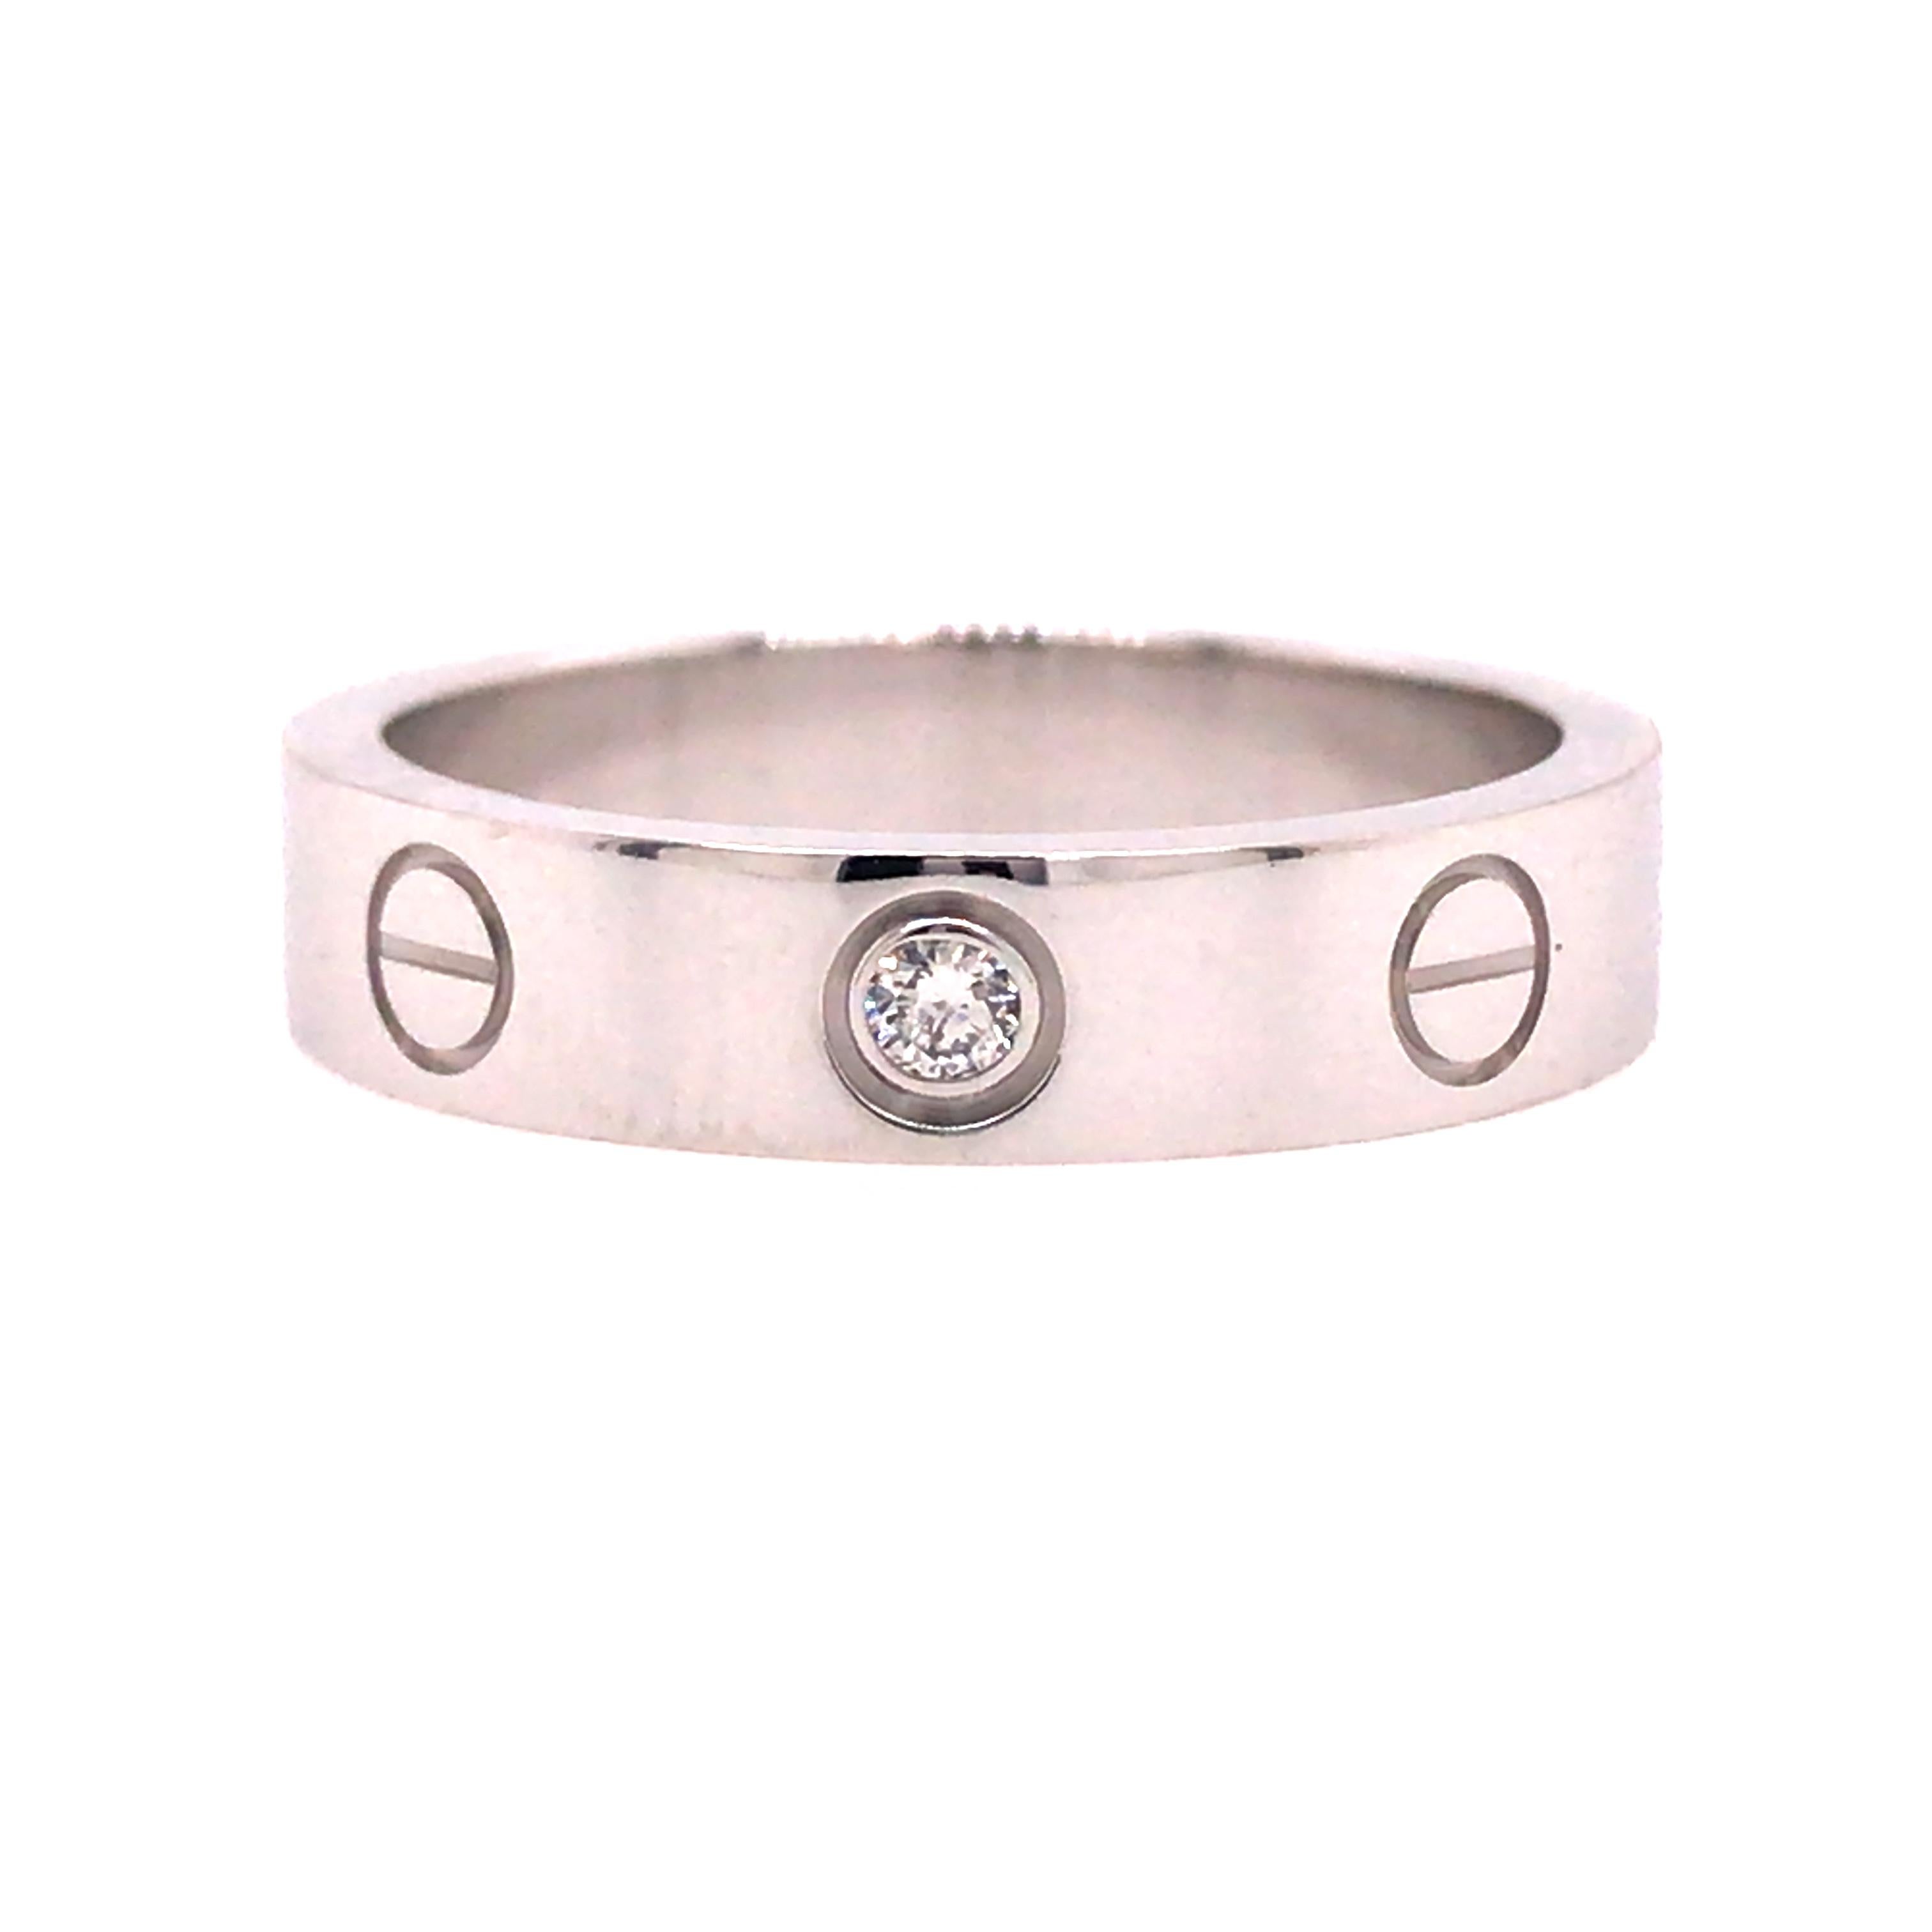 Cartier One Diamond Love Ring in 18K White Gold.  (1) Round Brilliant Cut Diamond weighing 0.02 carats is expertly set. The ring measures 4mm in width.  Ring size 4 3/4.  Stamped 